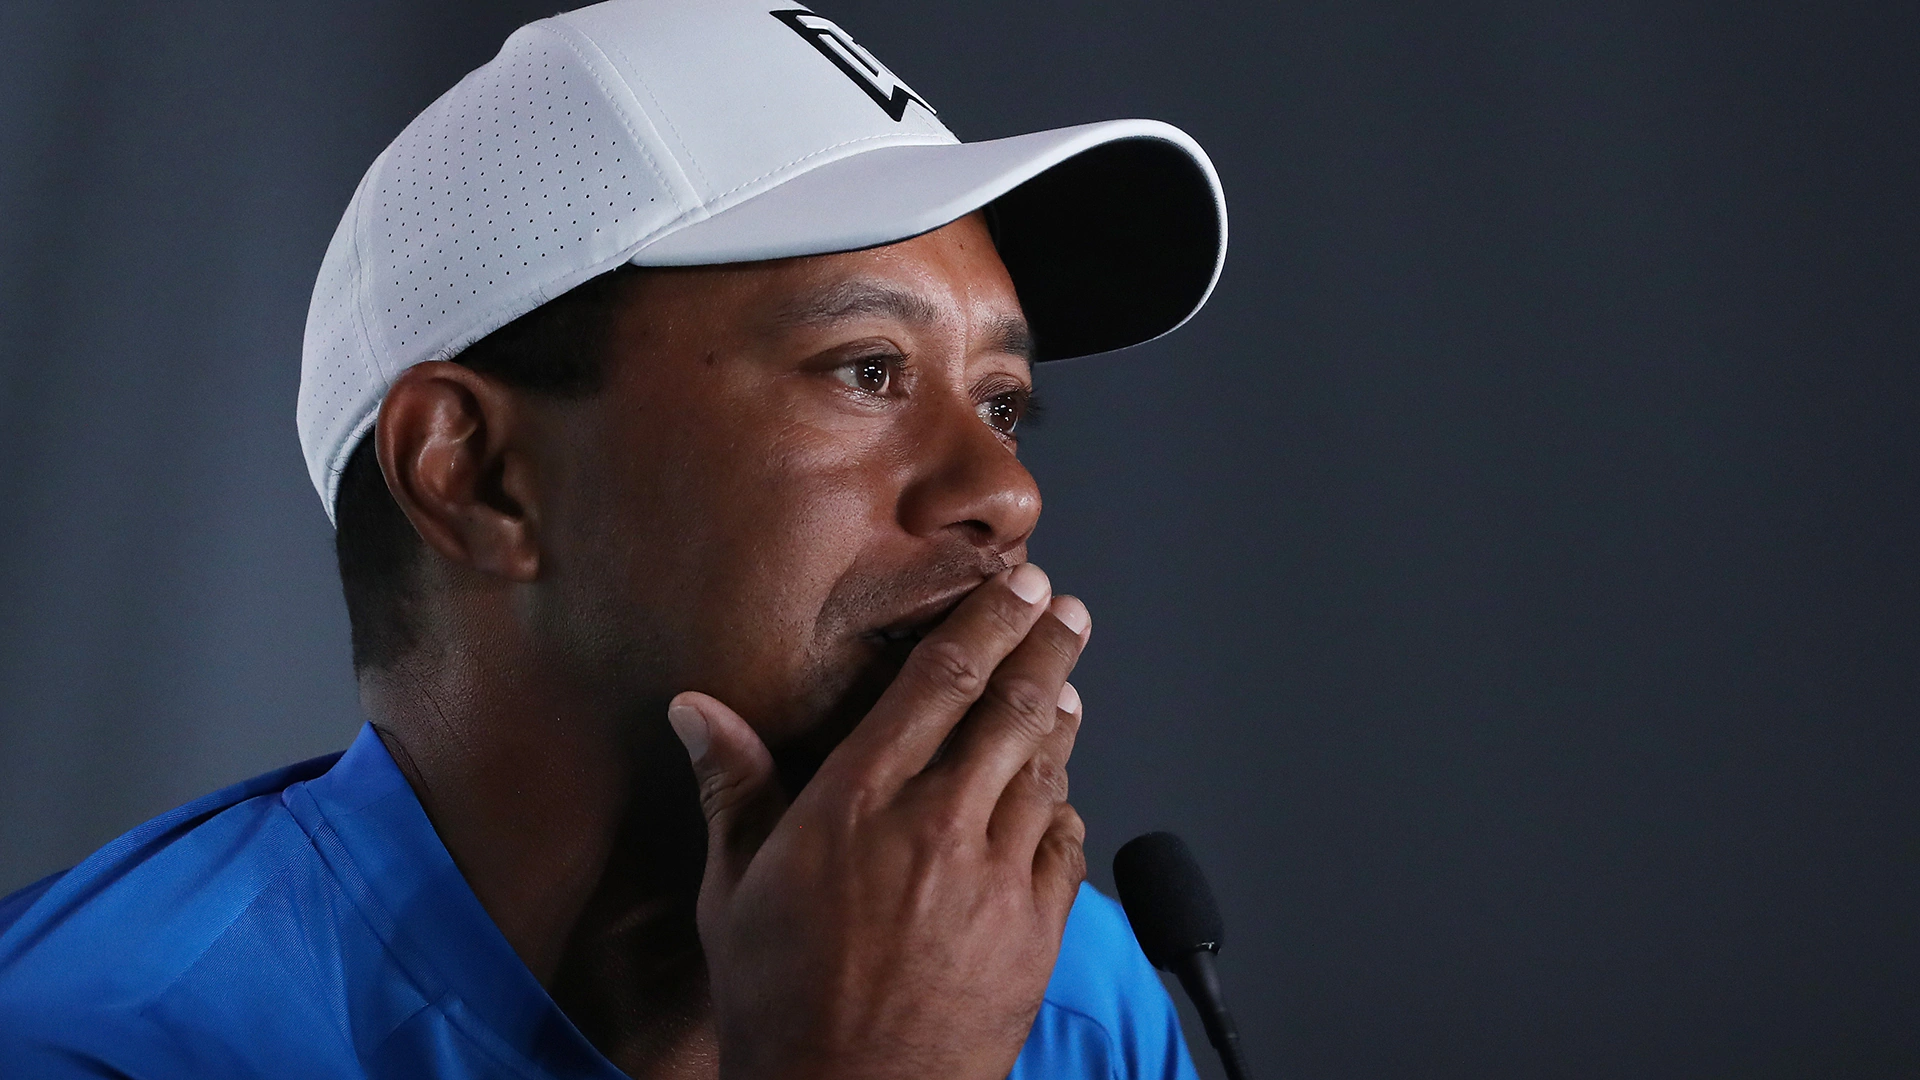 Tiger Woods on if he’ll play 2021 Masters Tournament: ‘God, I hope so’